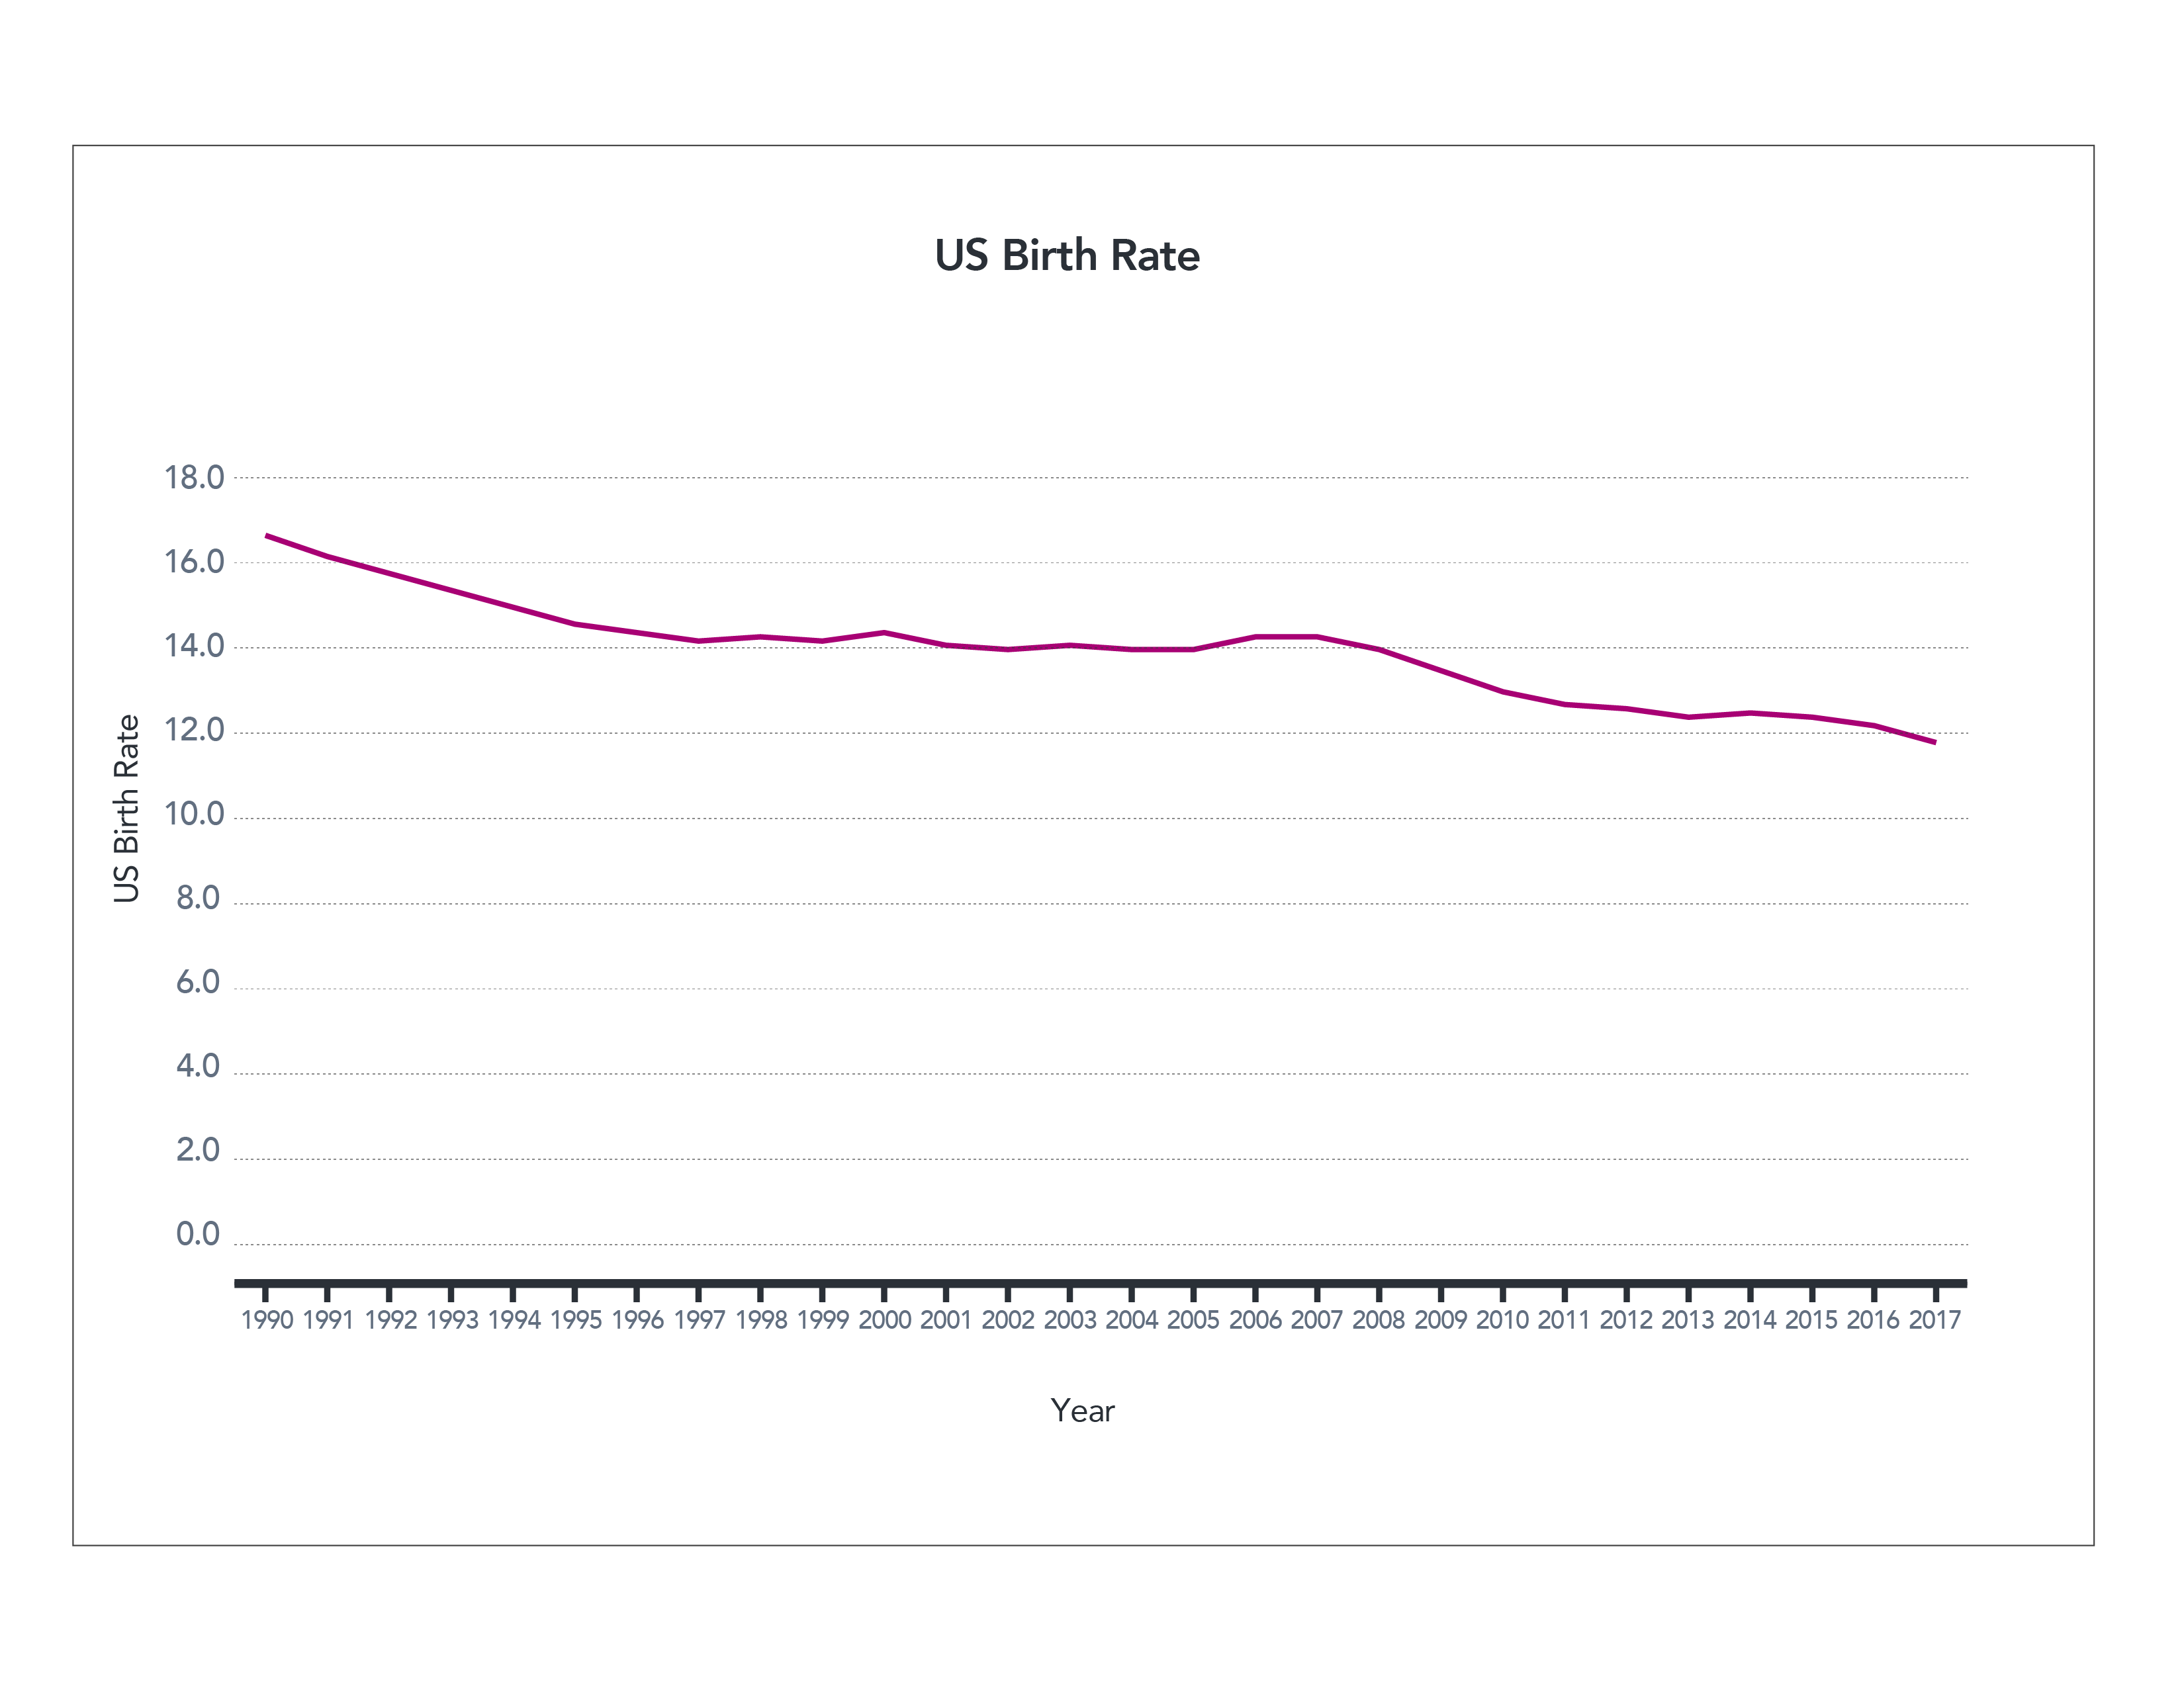 Figure 3. US Birth Rate (full axis)